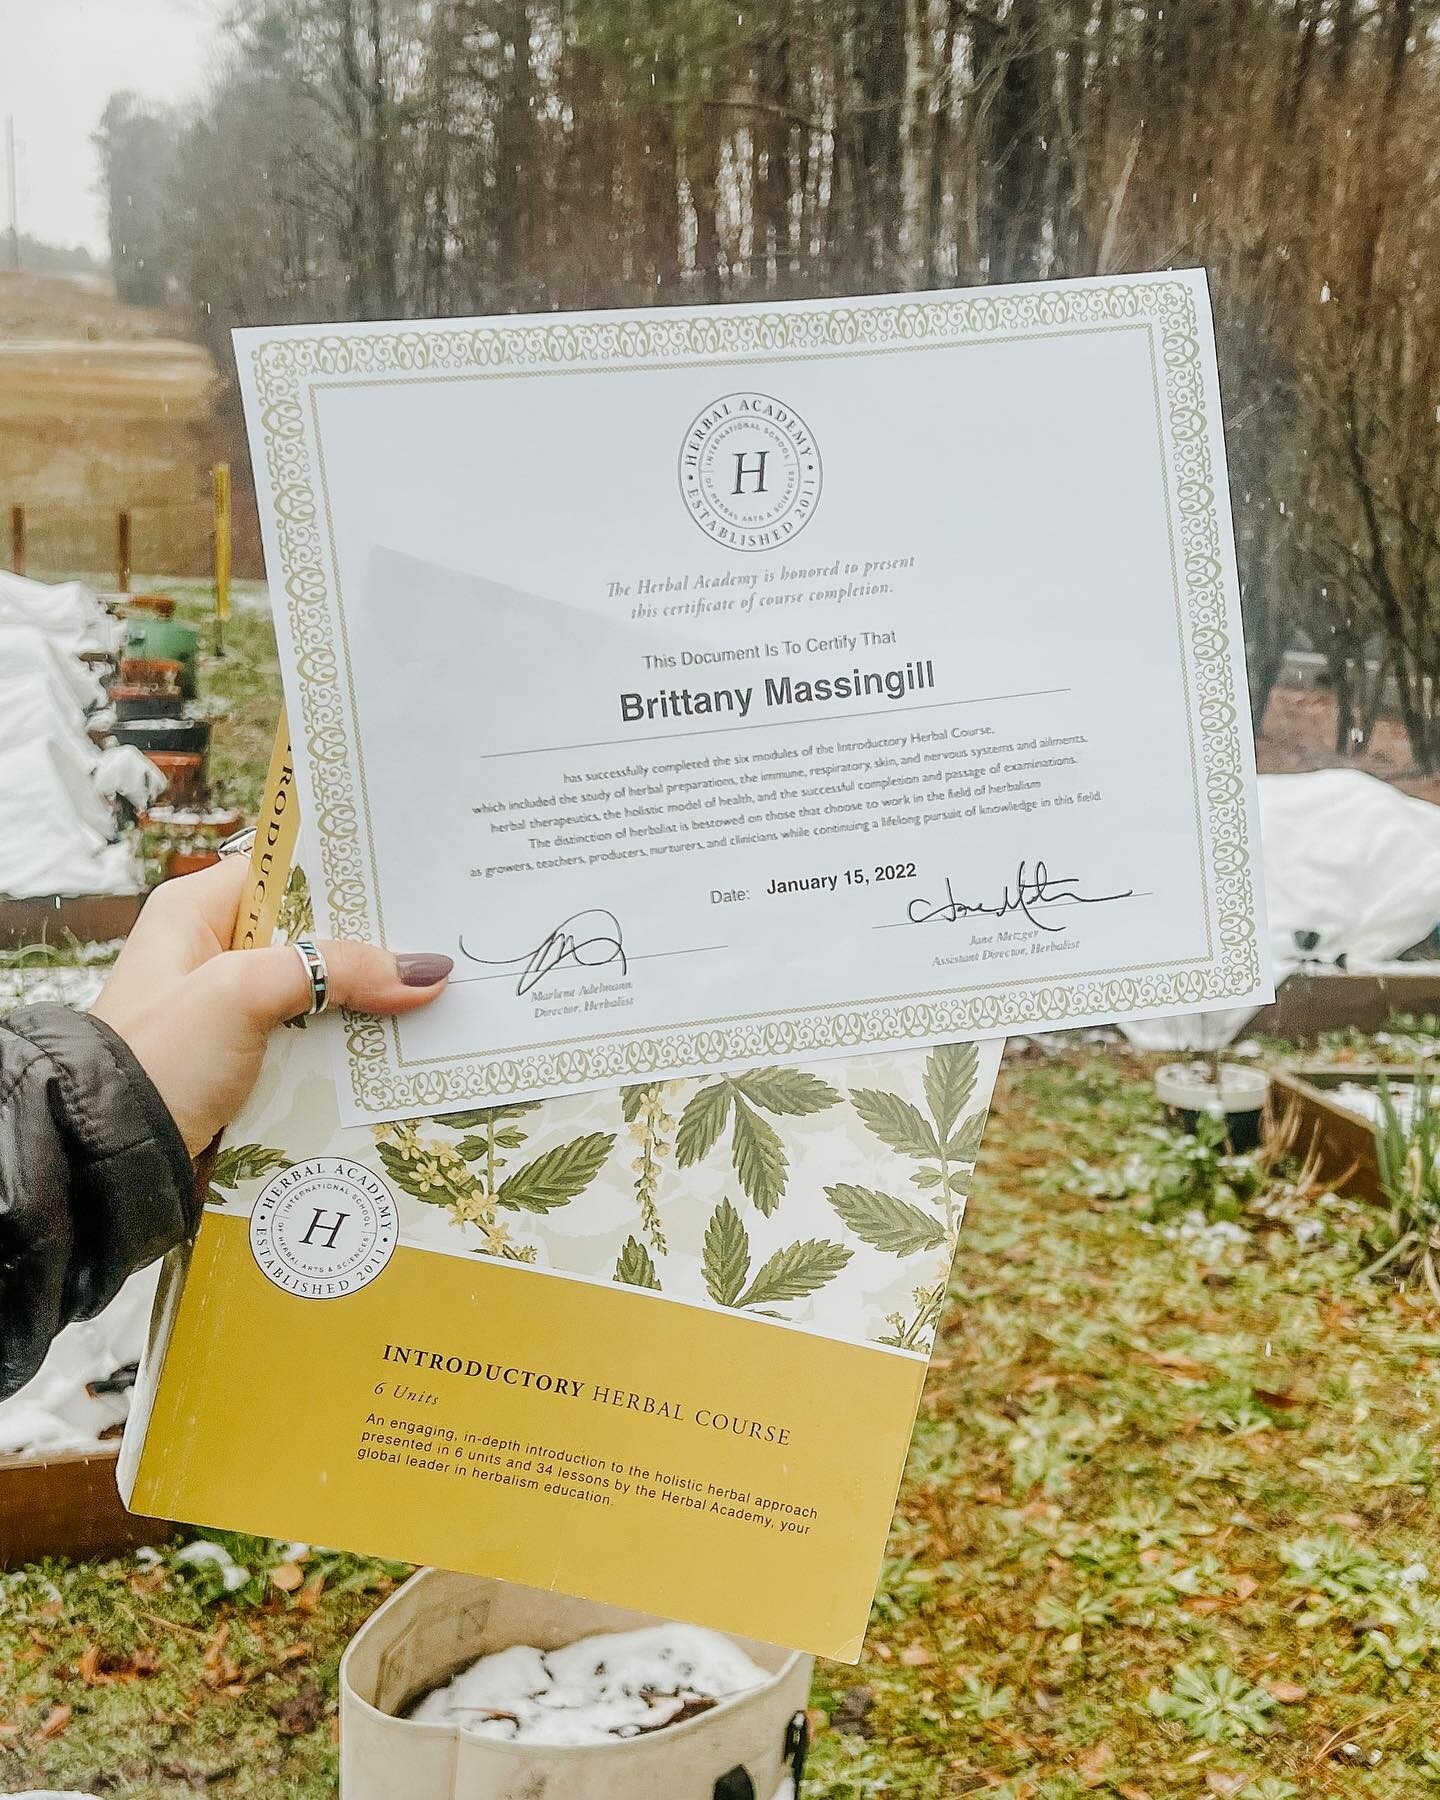 Completing the @herbalacademy Introductory Herbal Course has been on my wish list for a long time✅

I decided to knock it out this winter before the spring garden season began - spending every free moment the past few weeks studying up.

Really looki